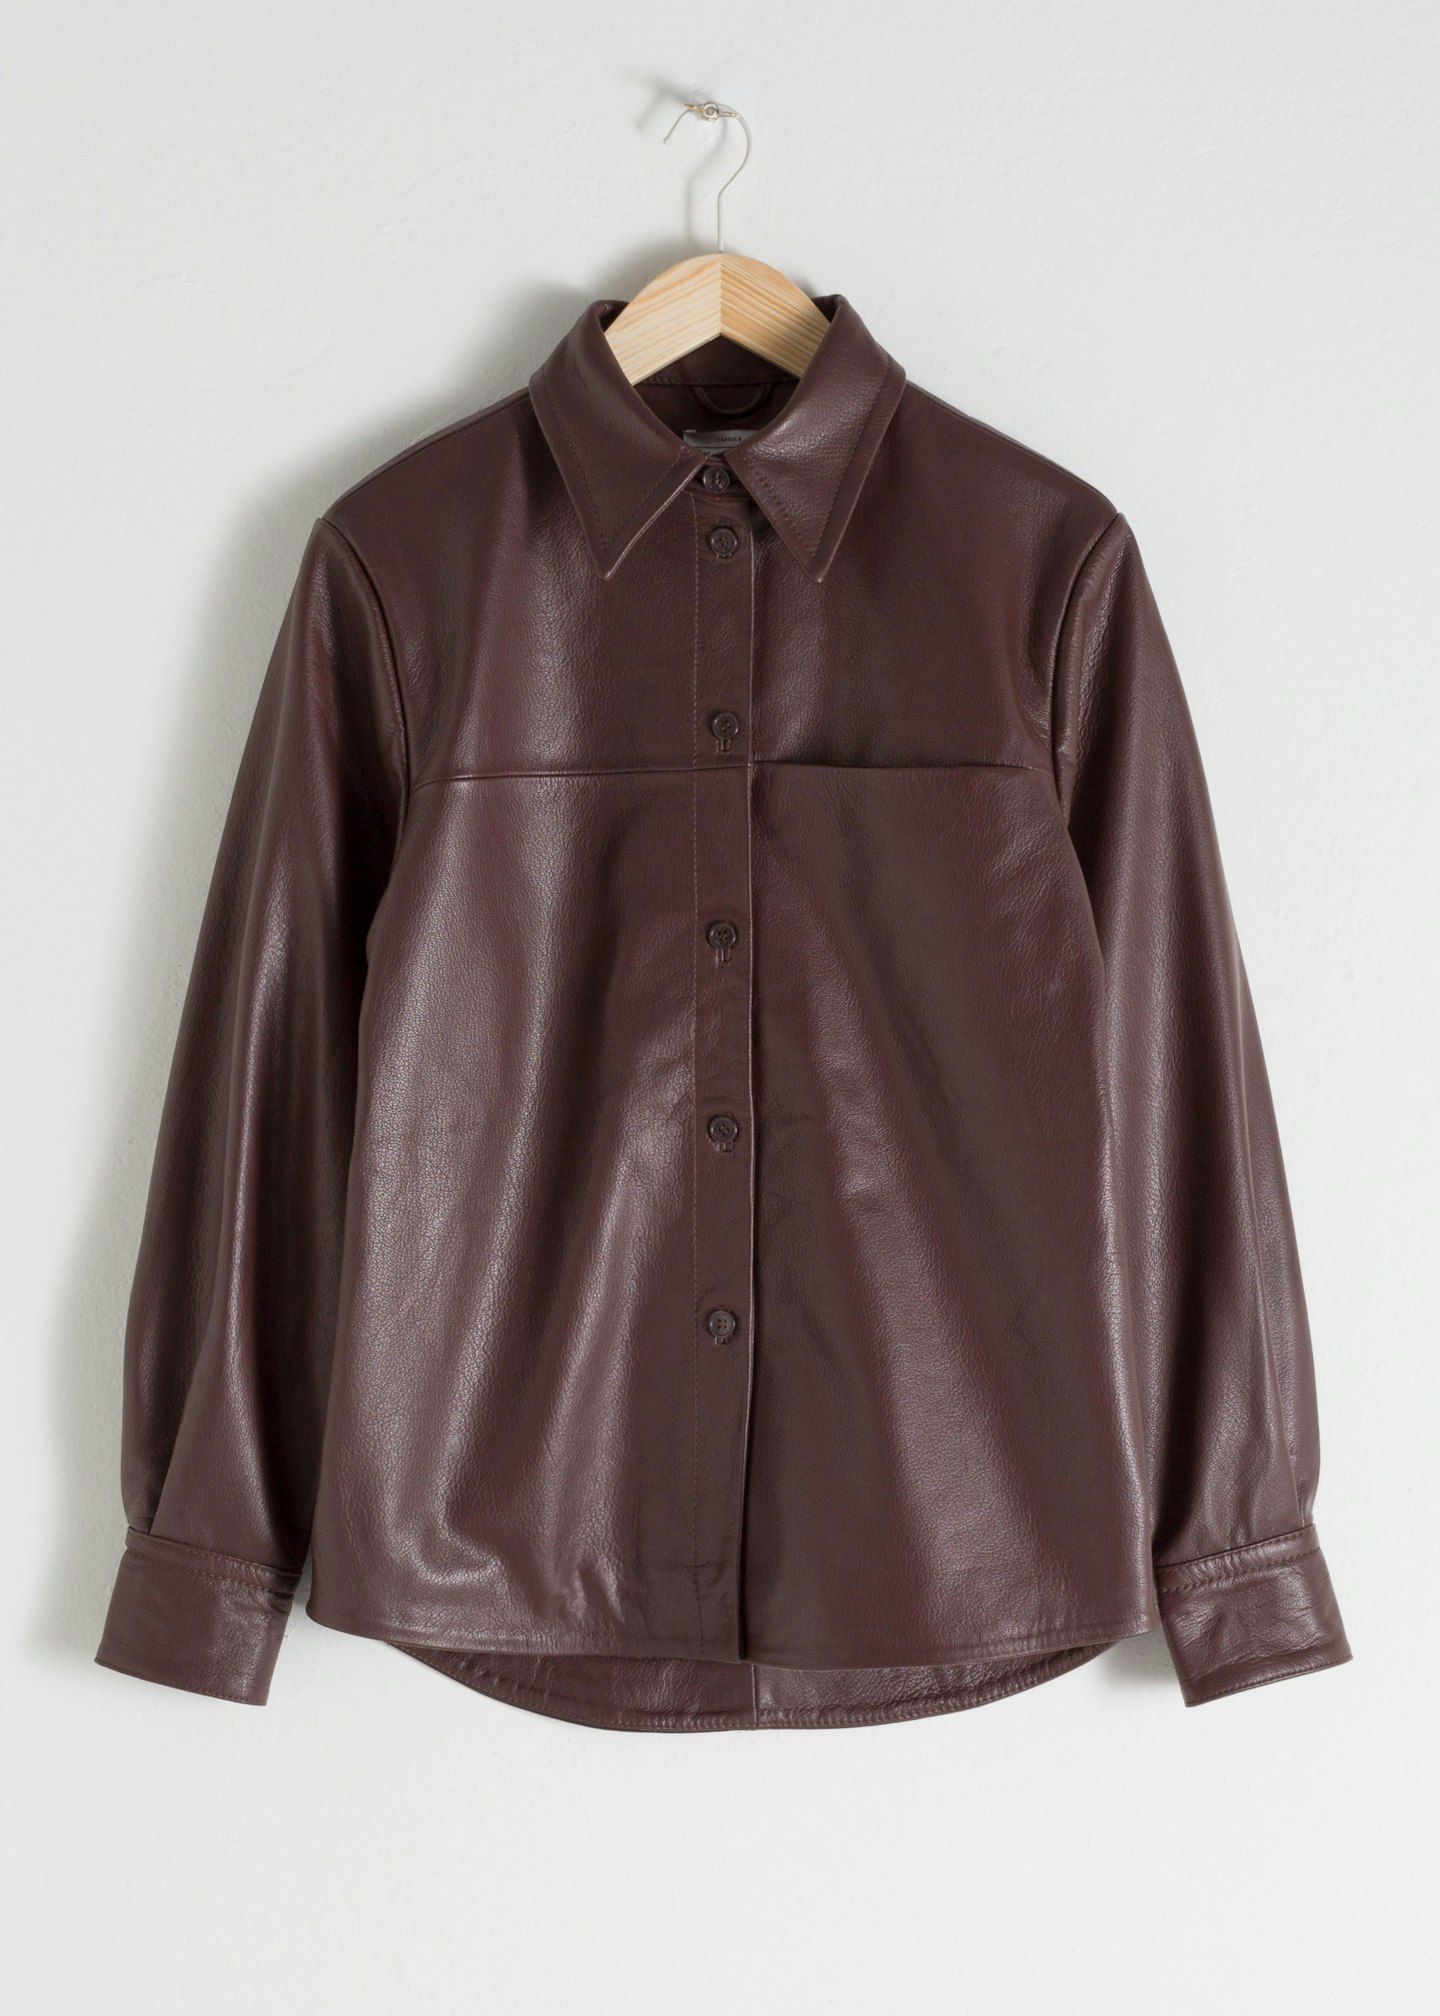 & Other Stories, Button-Up Leather Shirt, £167